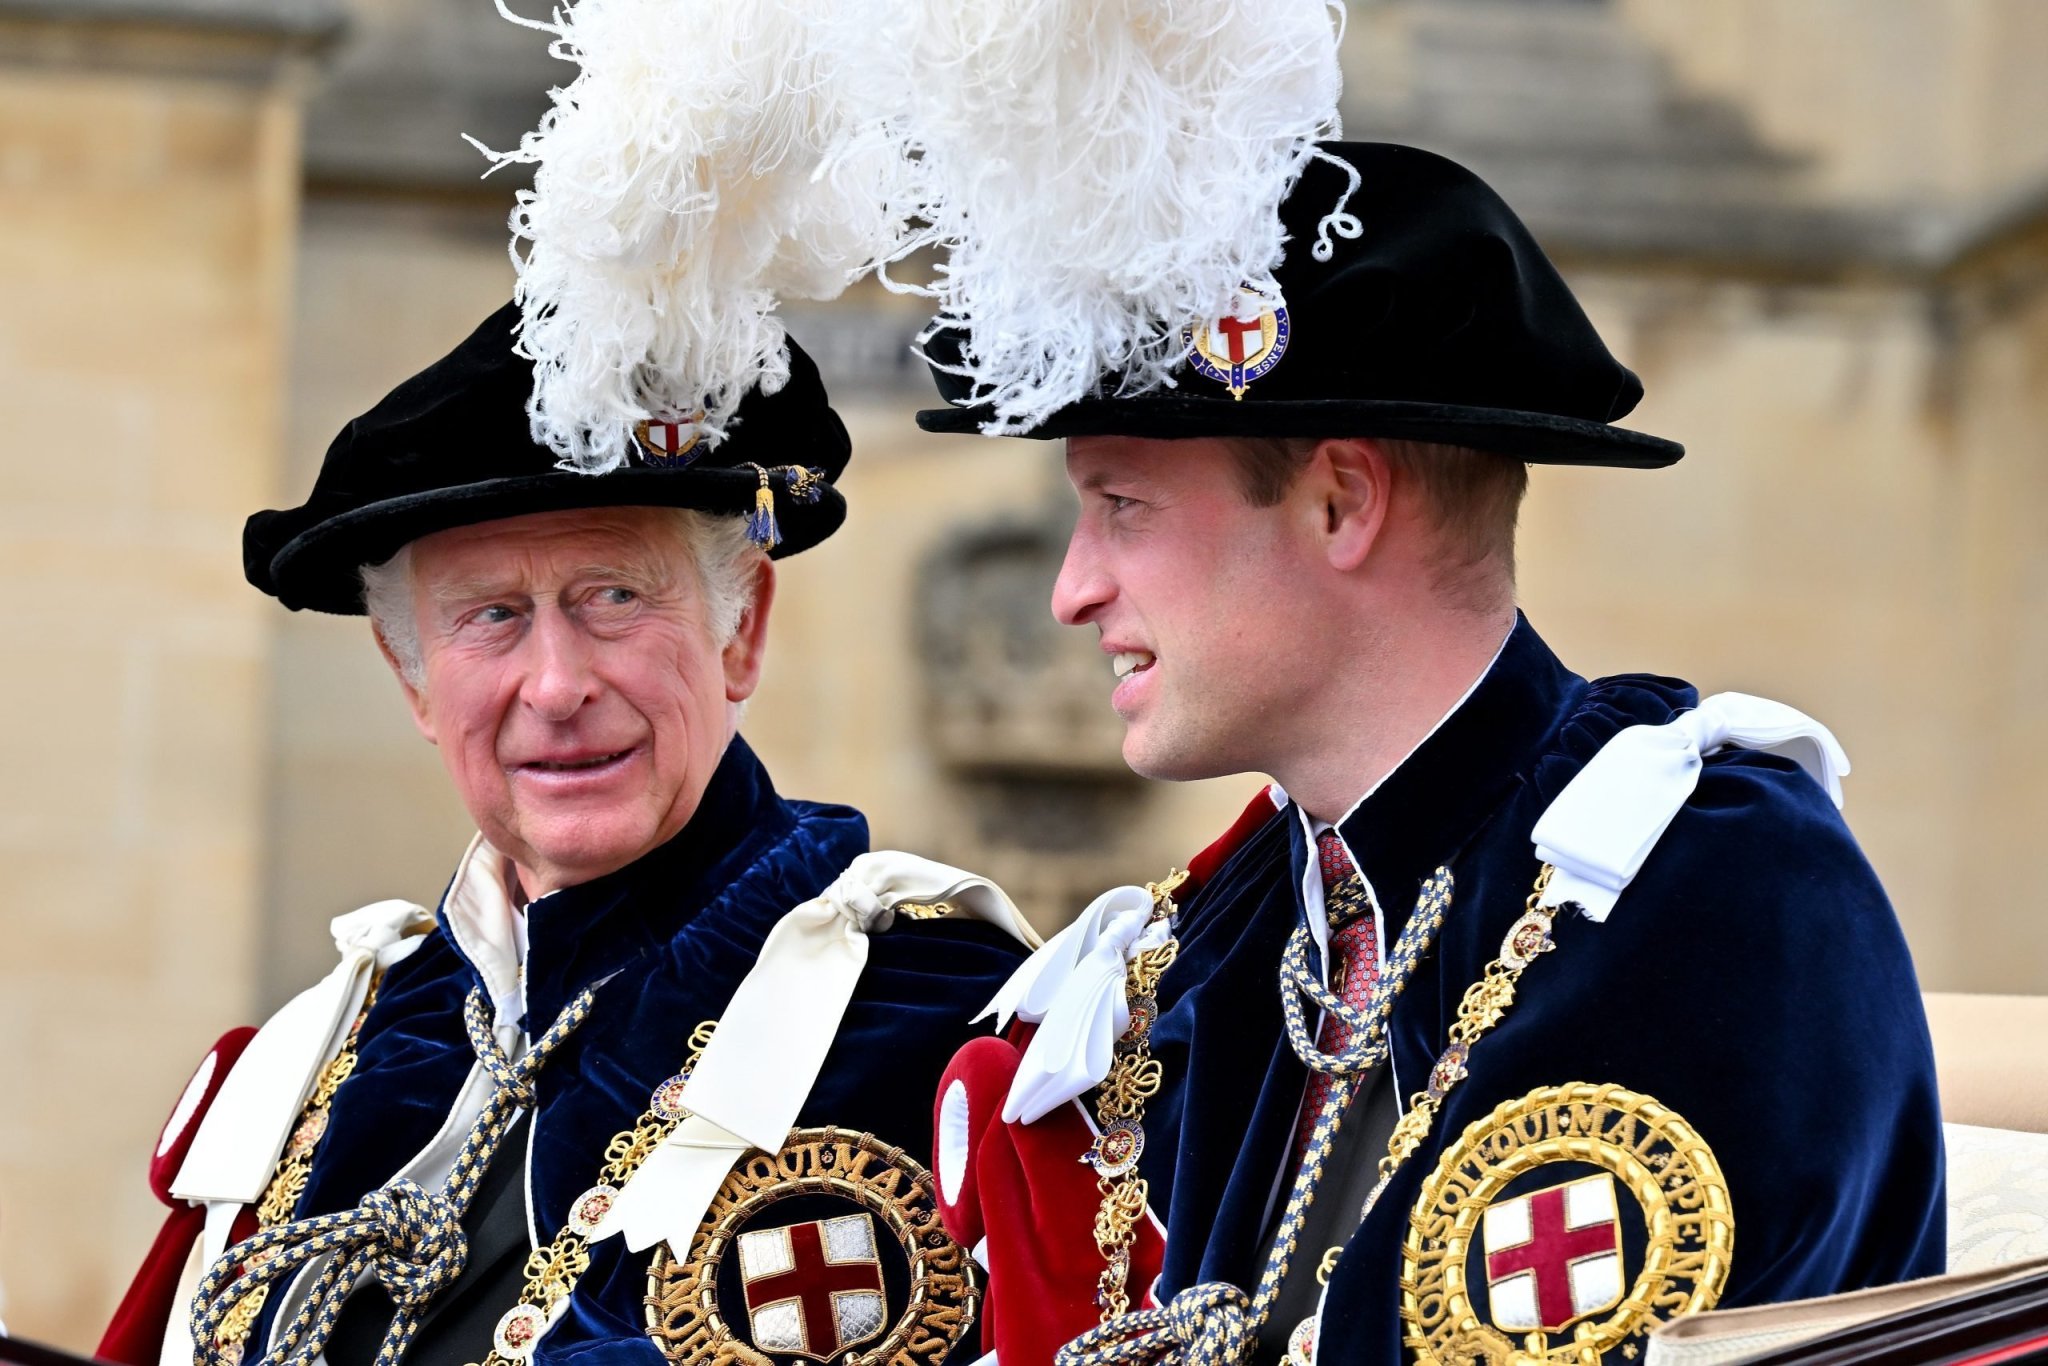 Prince William Is About to Get a Lot Richer Now That Charles Is King—Here's Why